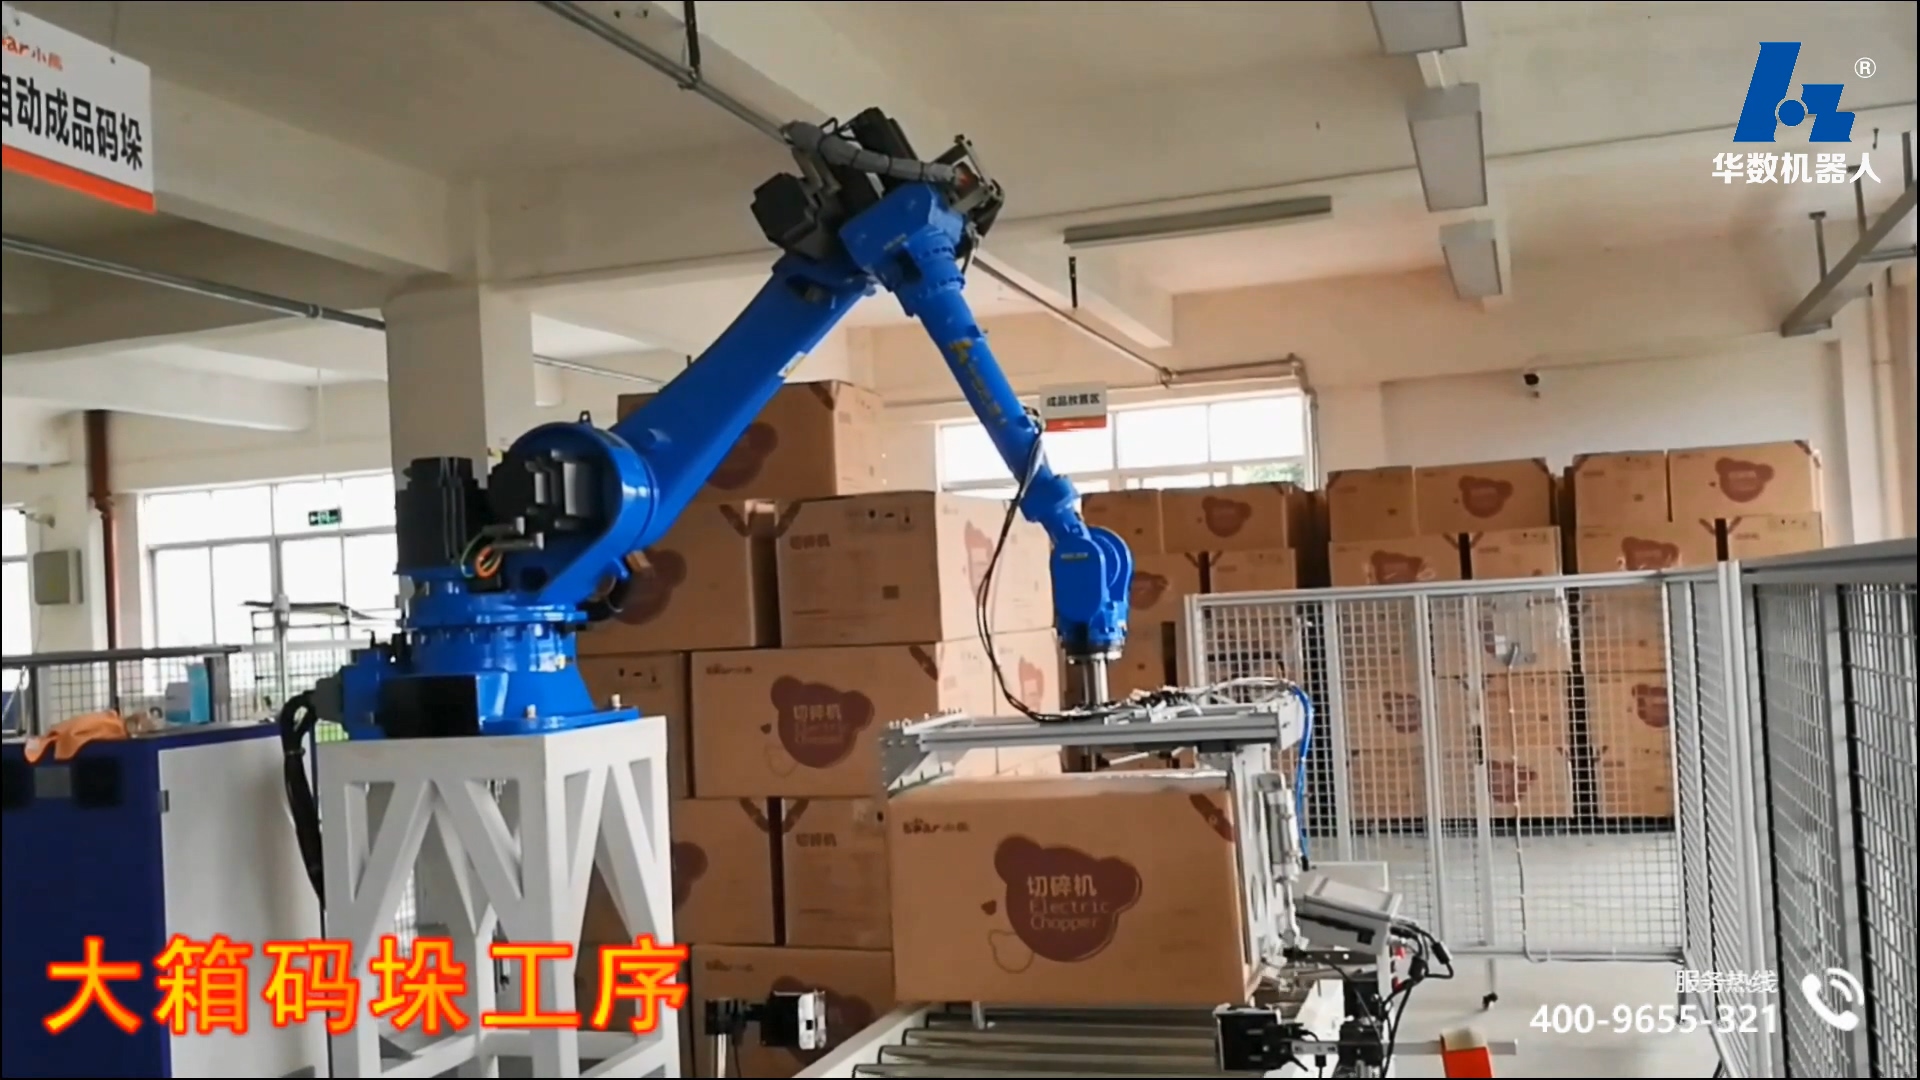 video of application of small appliances and large box palletizing